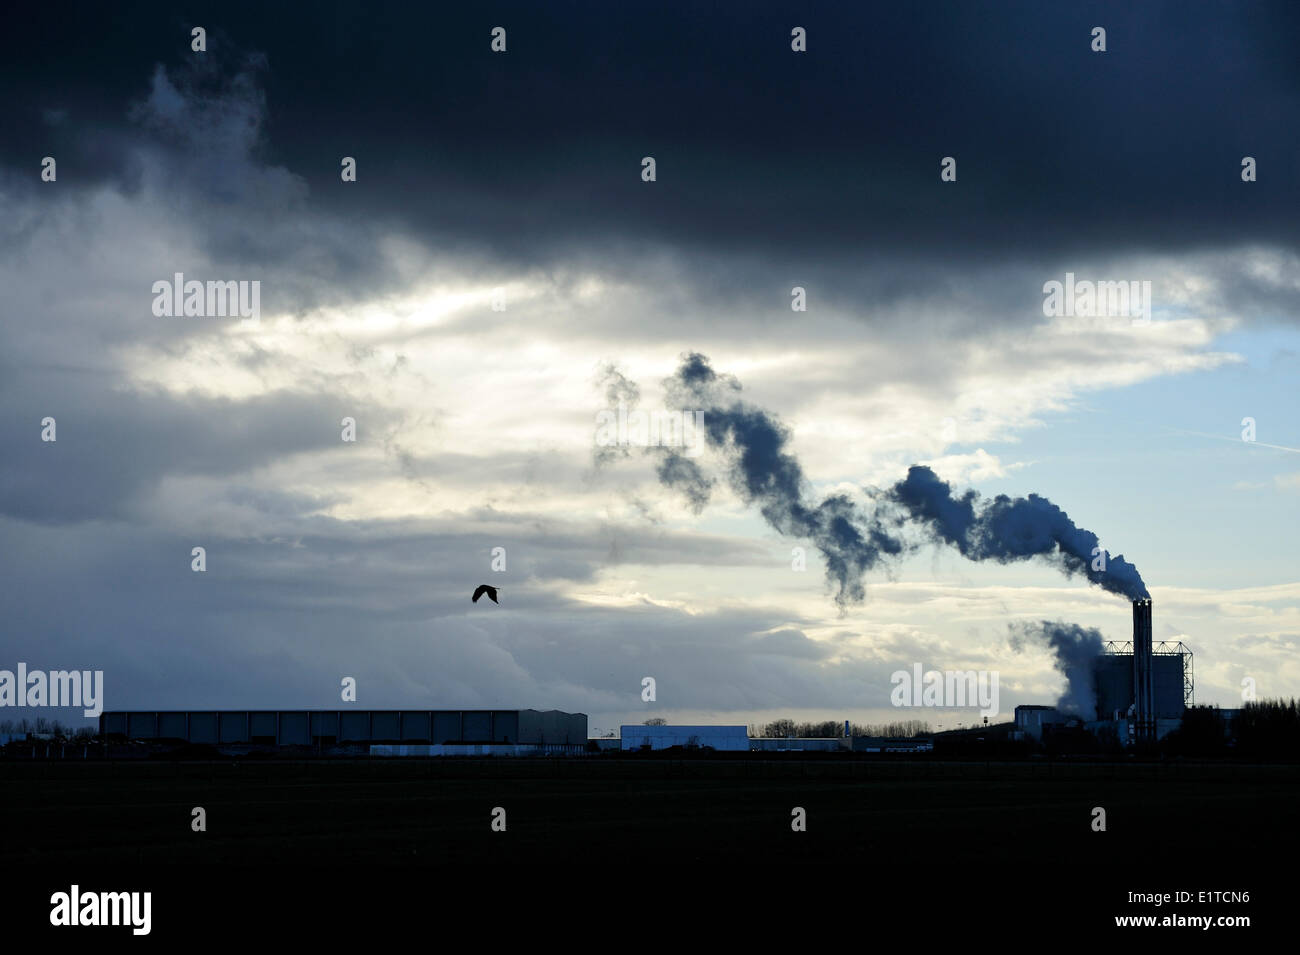 Smoking chimney against the light with a raincloud Stock Photo